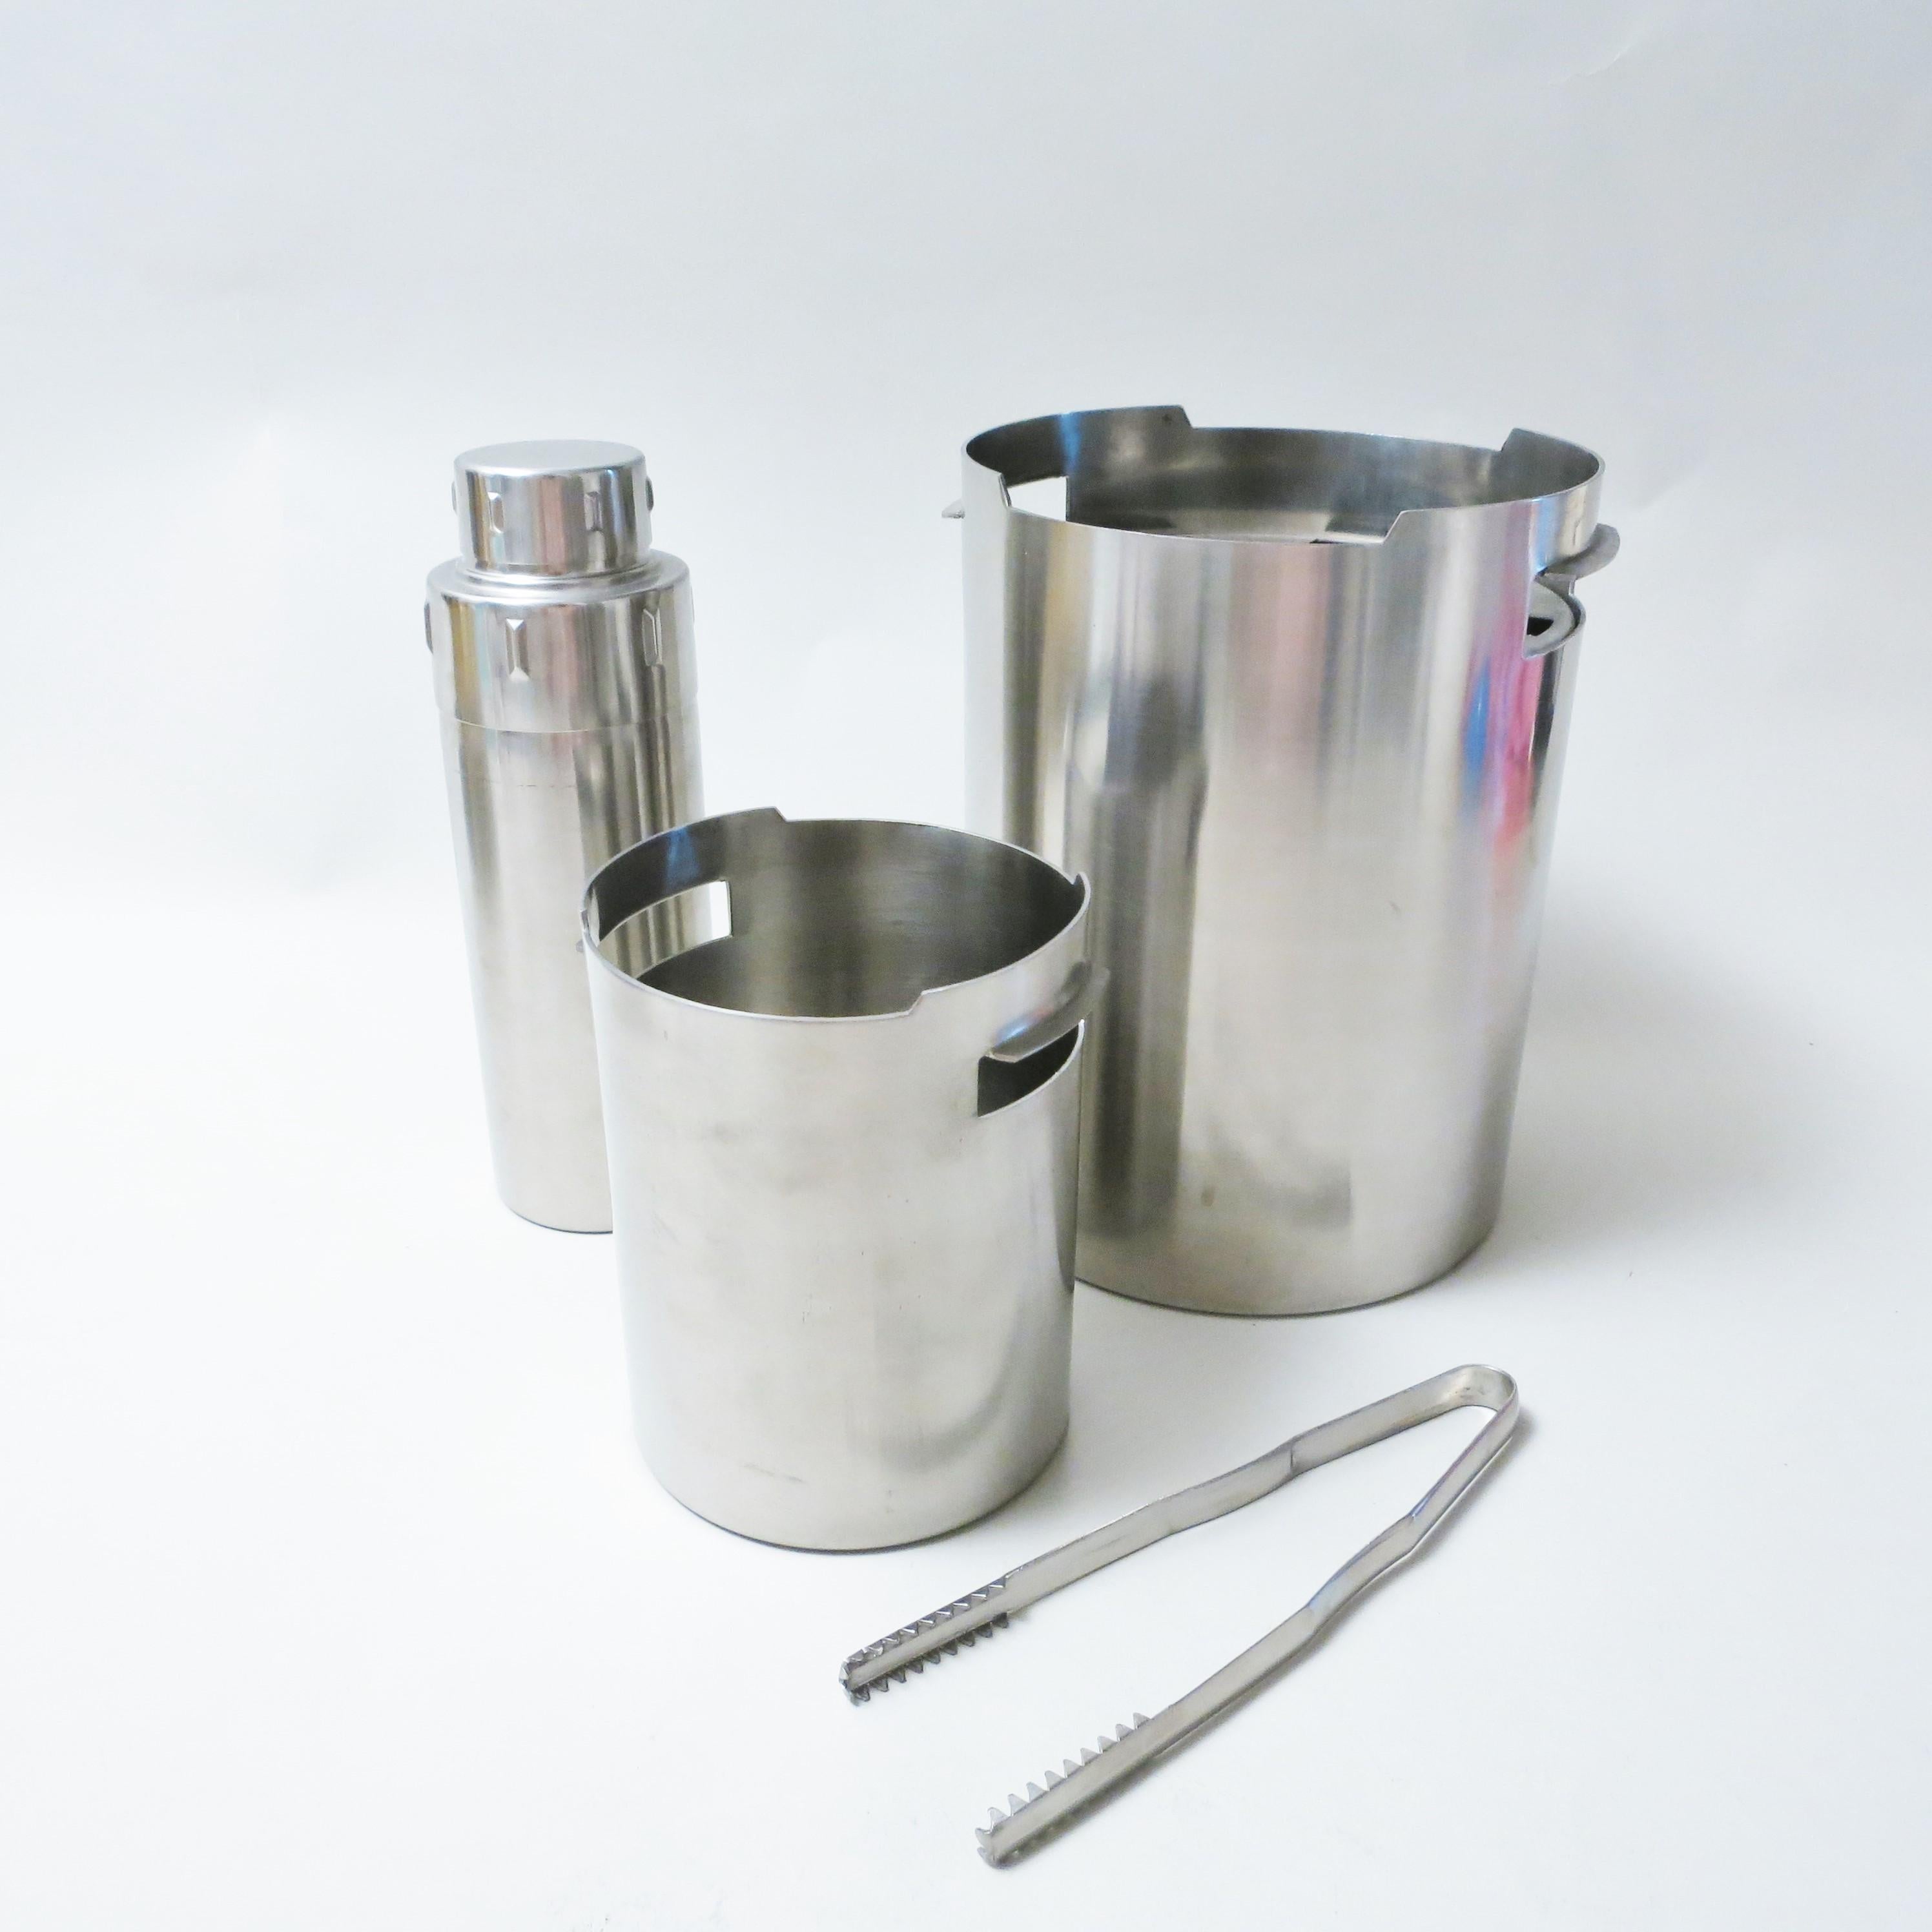 Cocktail set with a shaker, a icebucket and a bottle cooler designed by Gio Ponti for the Hotel Parco dei Principi di Roma and produced by Calderoni in stainless steel in the 1960s.
 